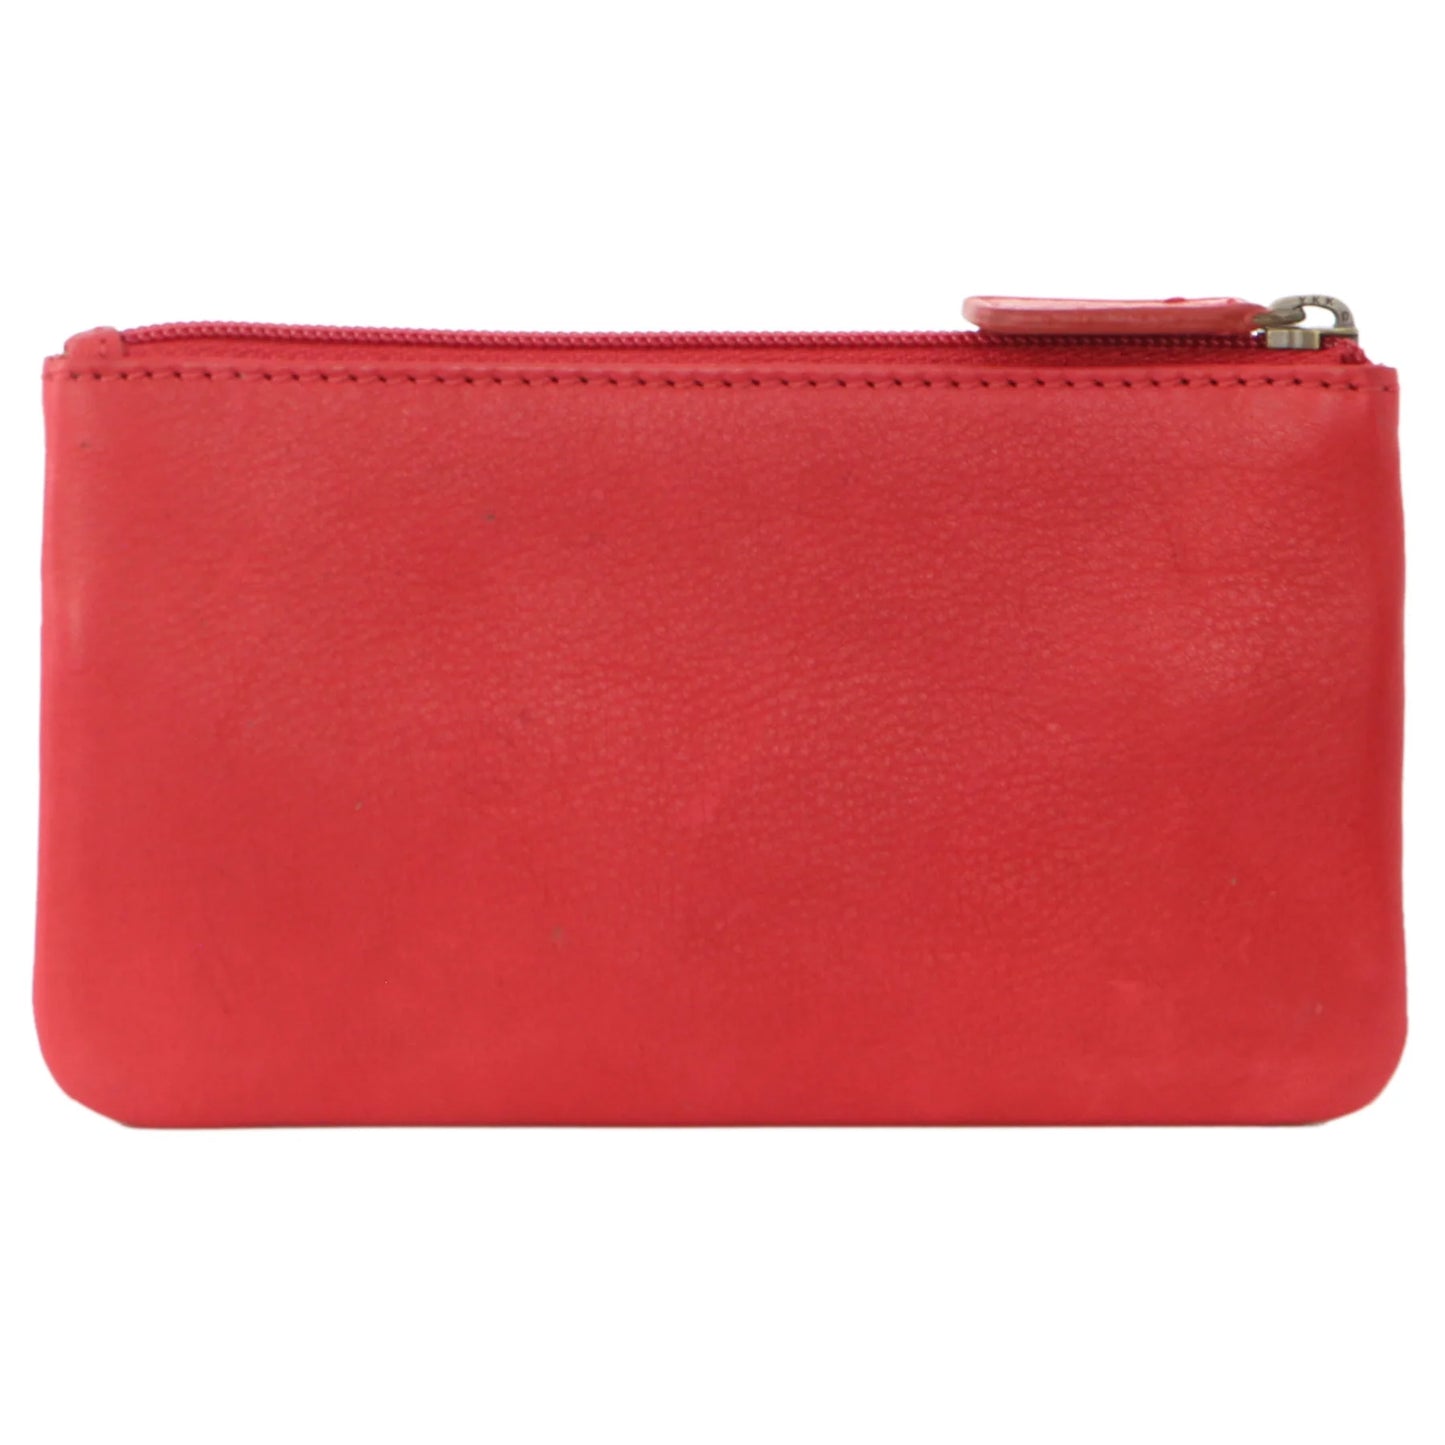 PIERRE CARDIN LEATHER ZIP COIN PURSE RED